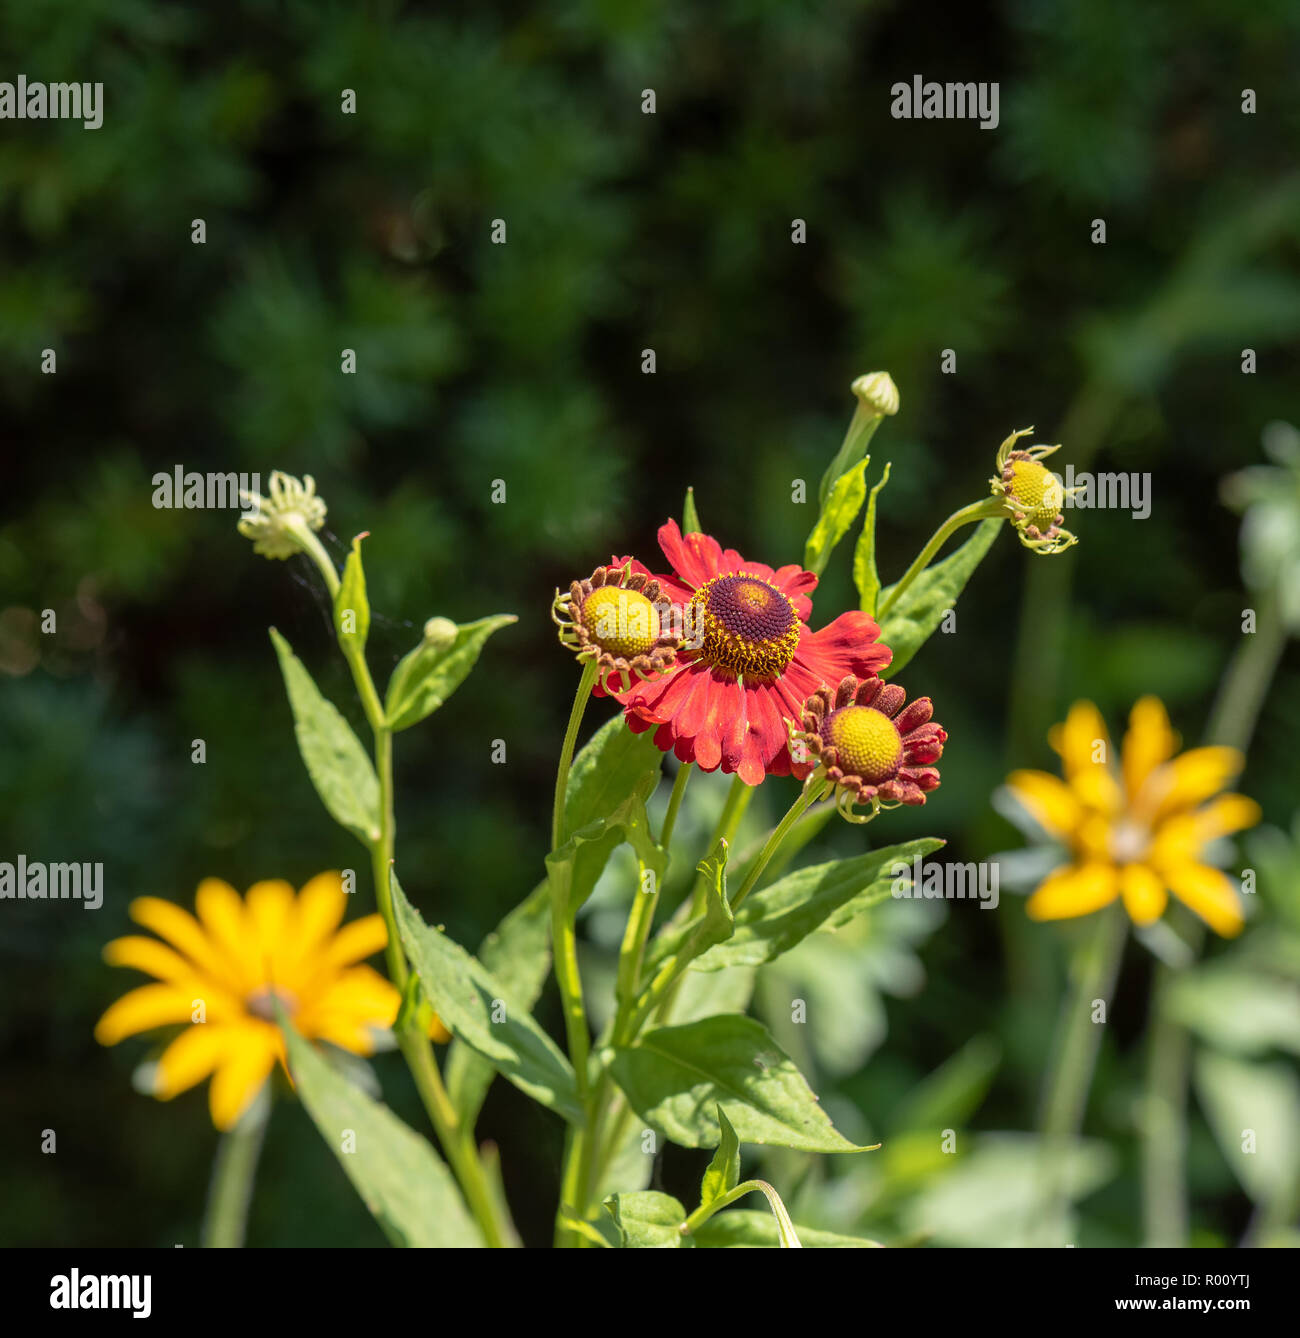 Natural floral colorful outdoor macro of a stem of  yellow red helenium / bride of the sun blossoms with buds,blurred green background,sunny summerday Stock Photo